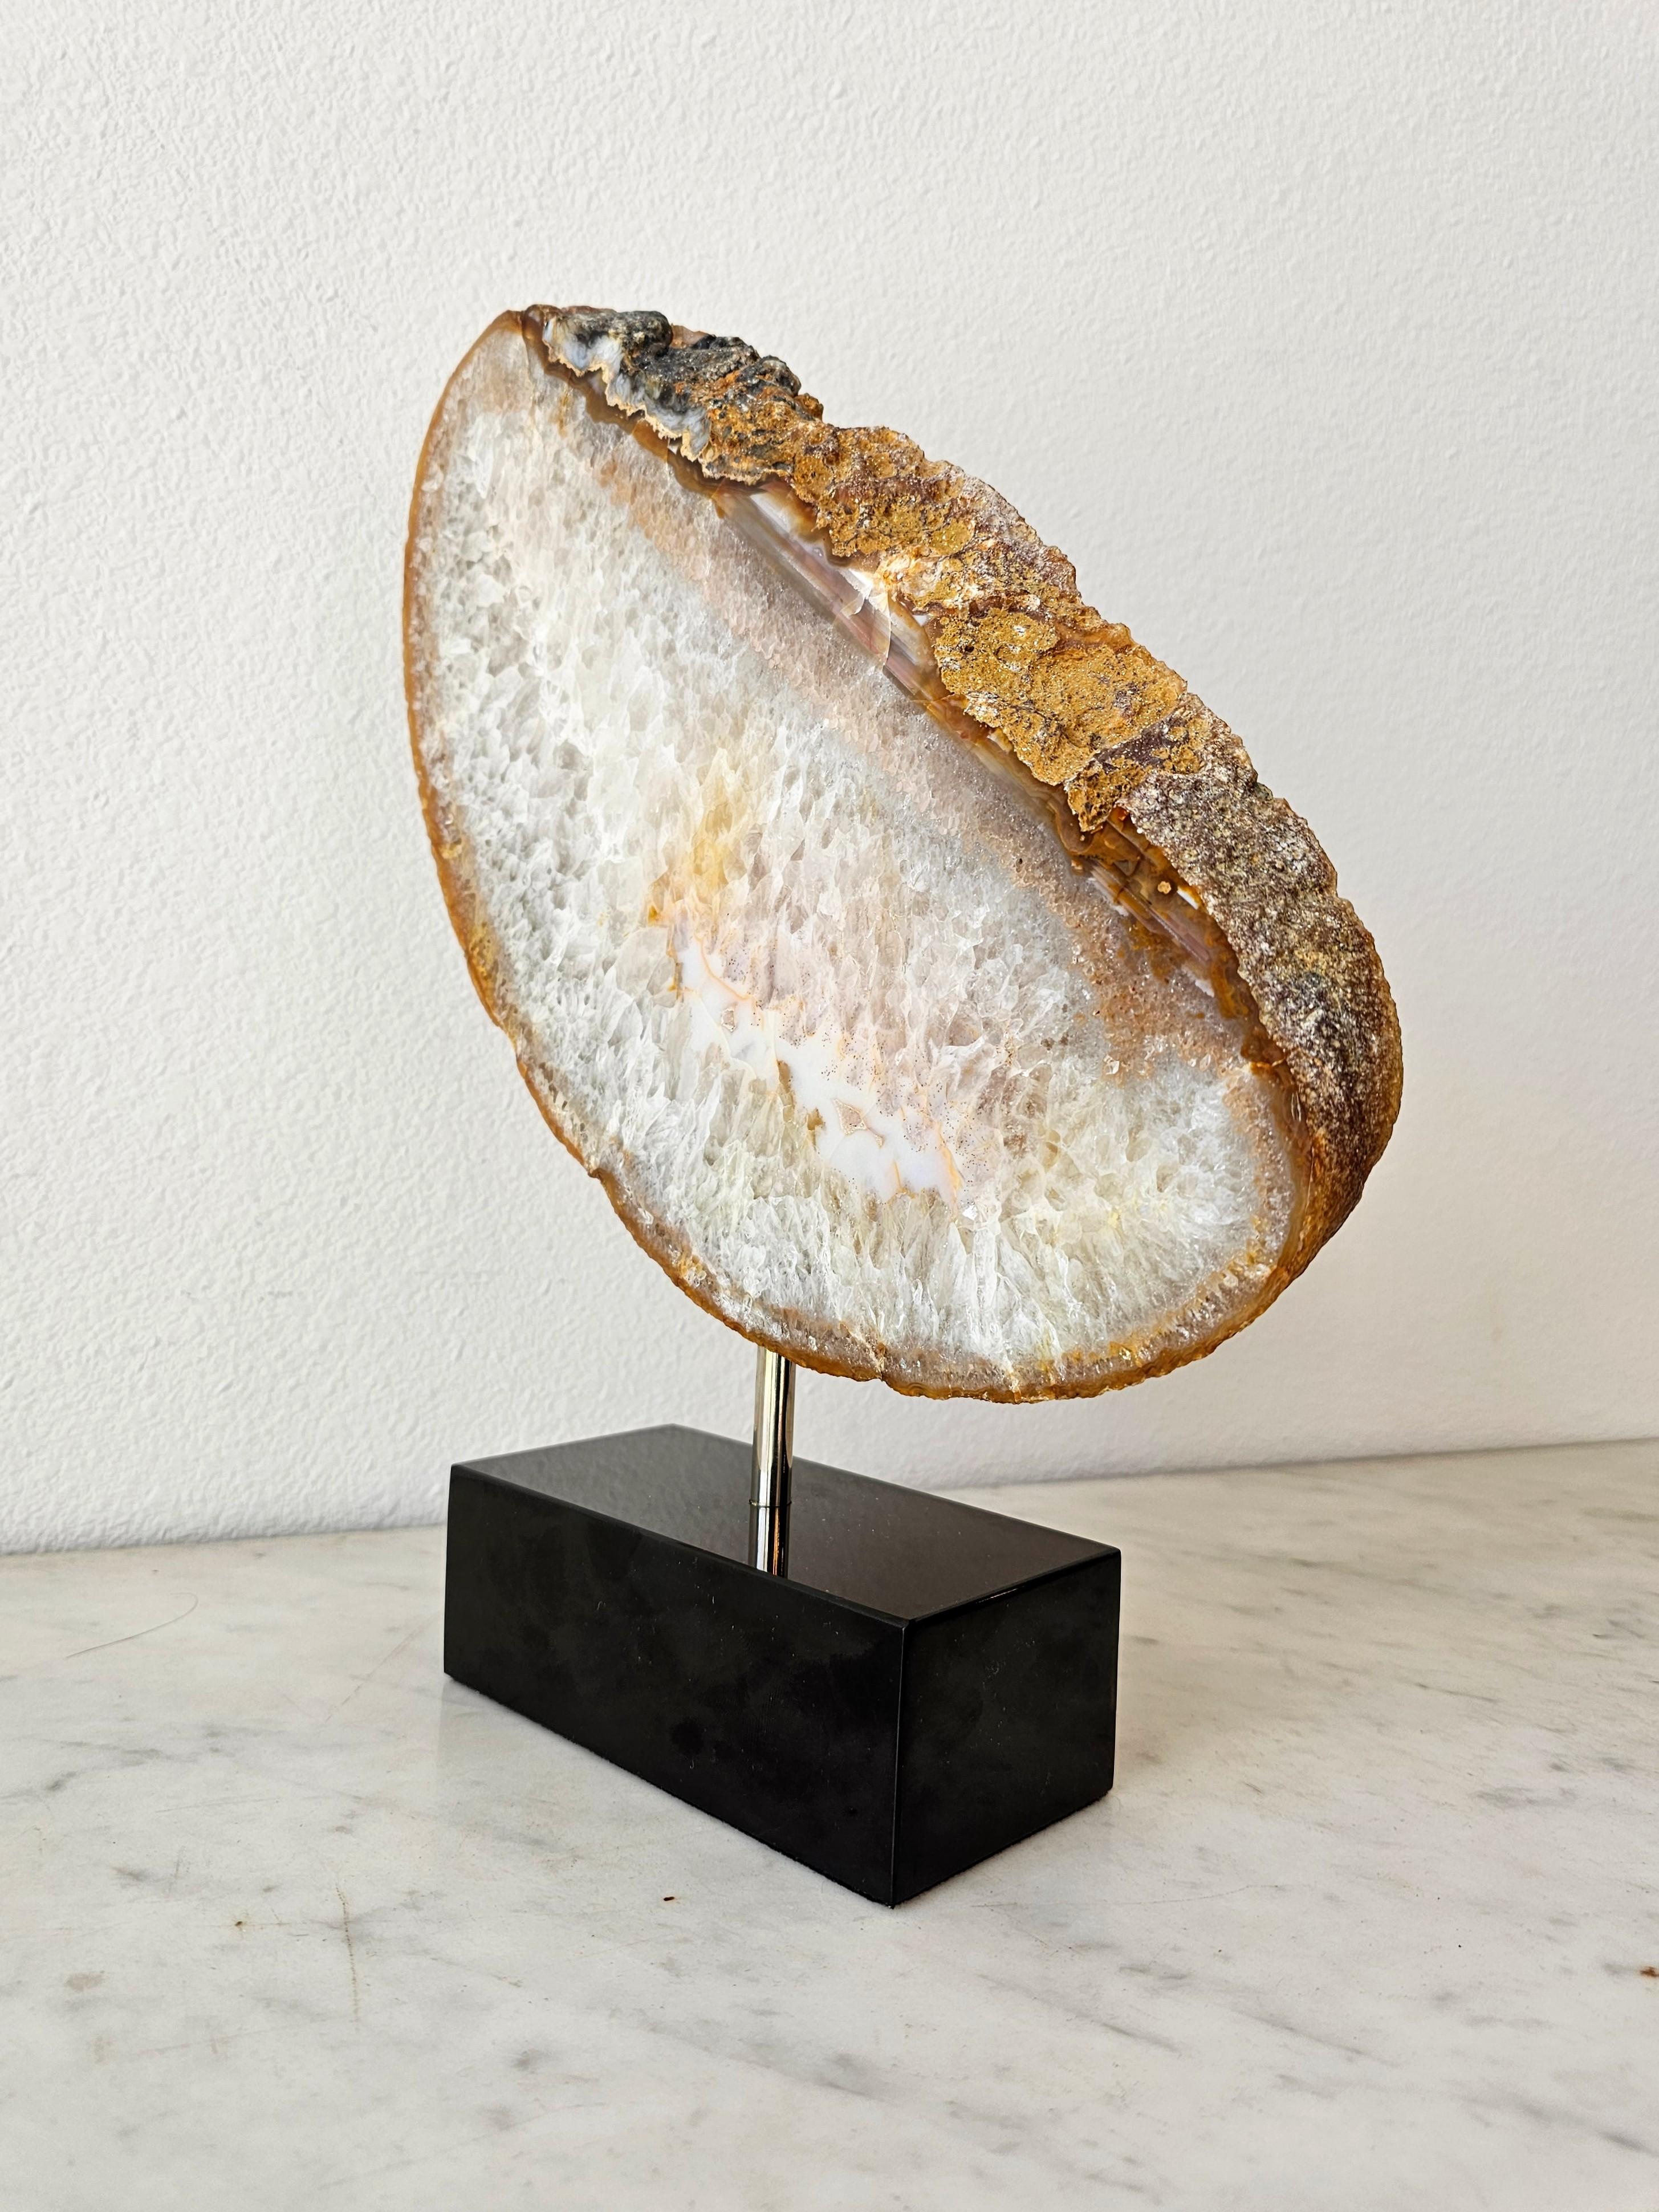 A visually striking natural polished agate gemstone slice, sculptural organic free-form, stunning example with rich patterns of color, transparency and distinctive inclusions, mounted on a contemporary rectangular black marble base stand.

For